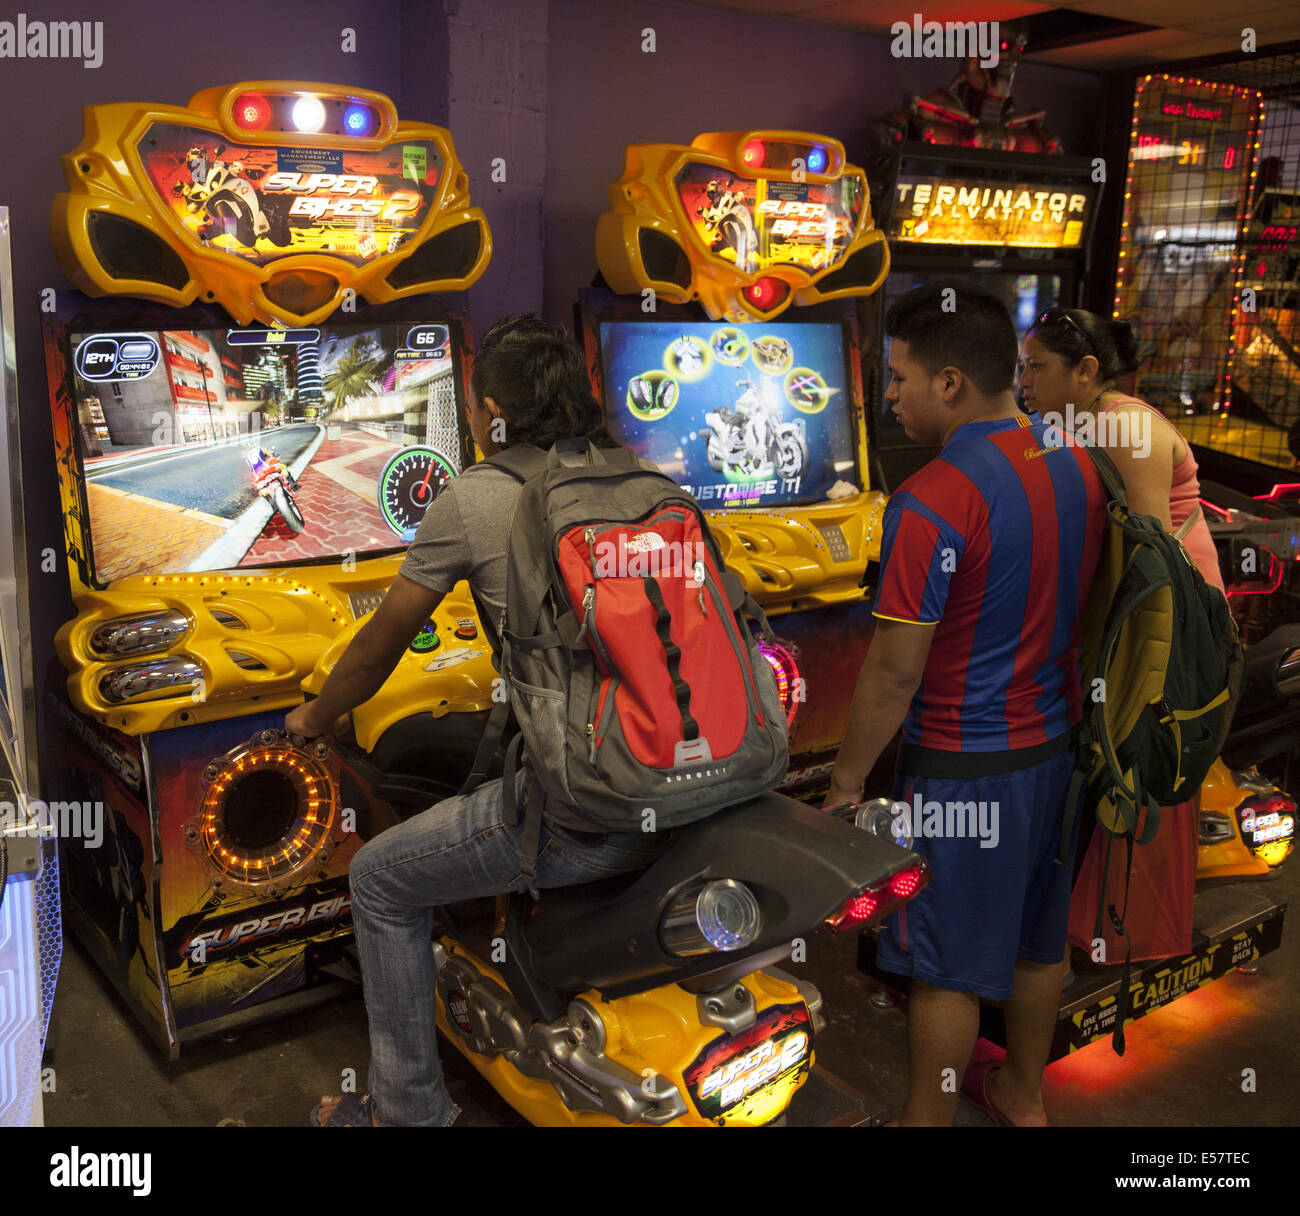 Coney Island; Video game arcades with violent games are popular with with adolescent and teenage boys along with some adults Stock Photo